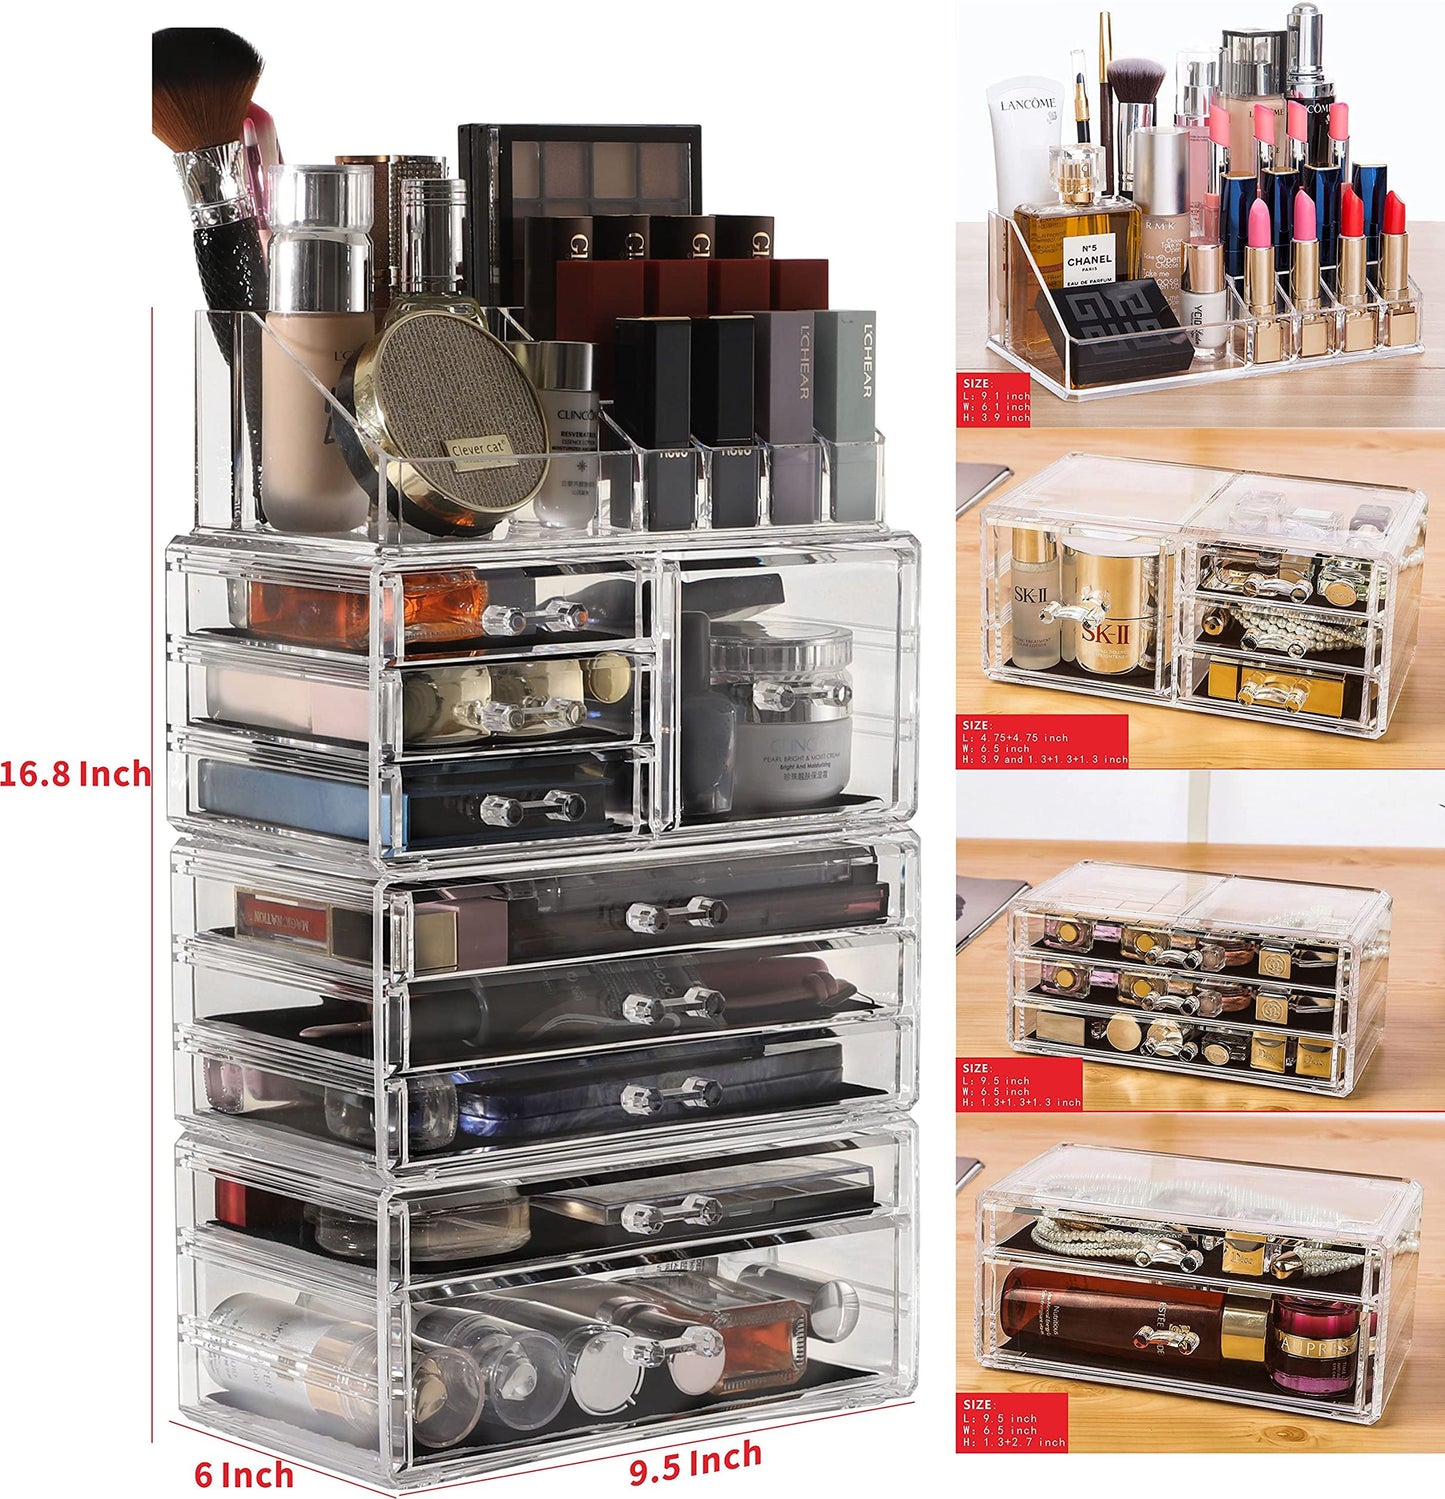 Large Clear Makeup Organizer Skin Care Cosmetic Display Cases Stackable Storage Box With 9 Drawers,Set of 4 By Cq acrylic